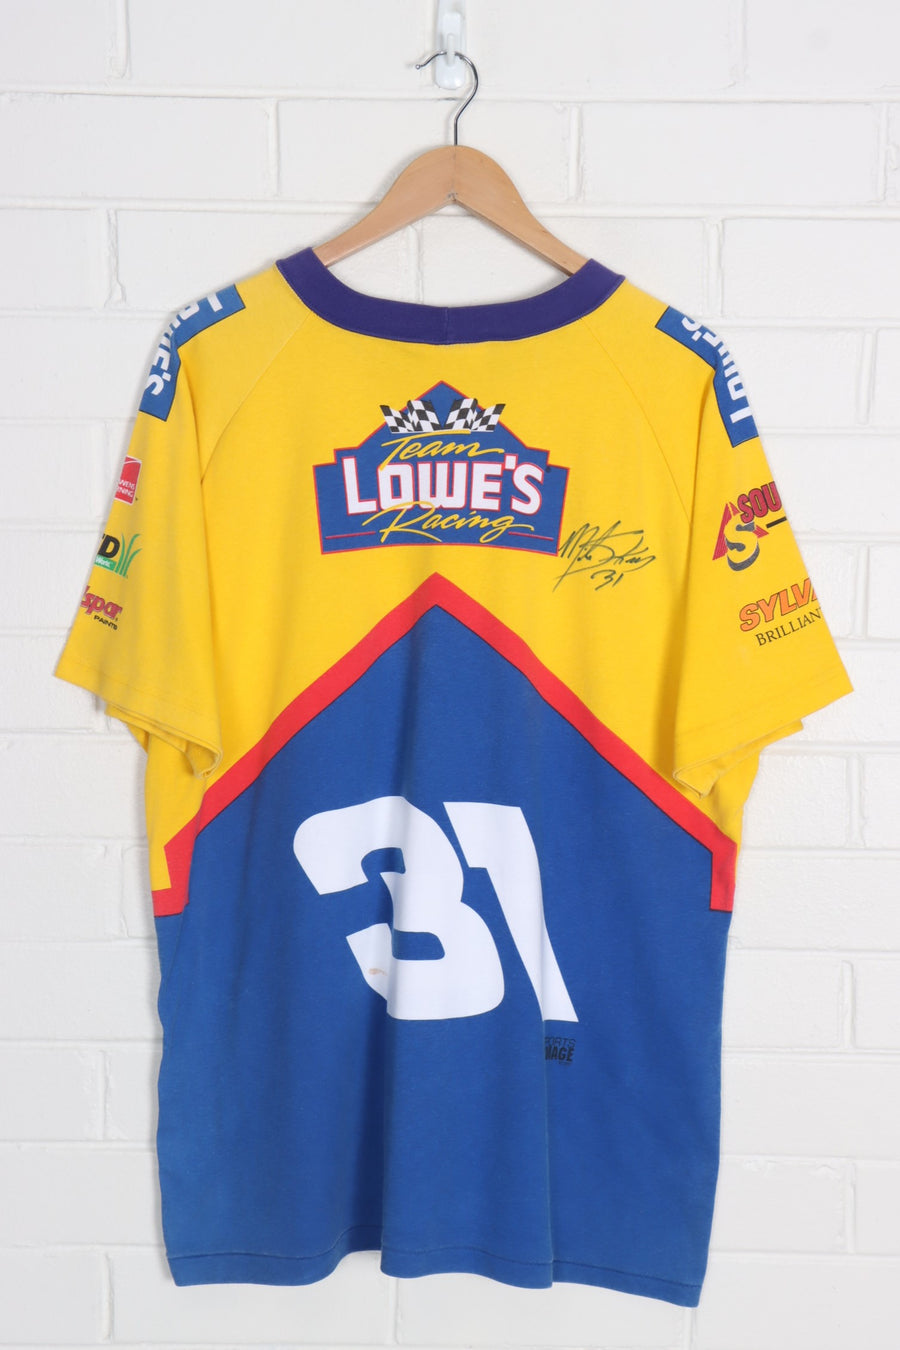 NASCAR Lowes Racing Mike Skinner Autograph All Over USA Made Tee (XL)